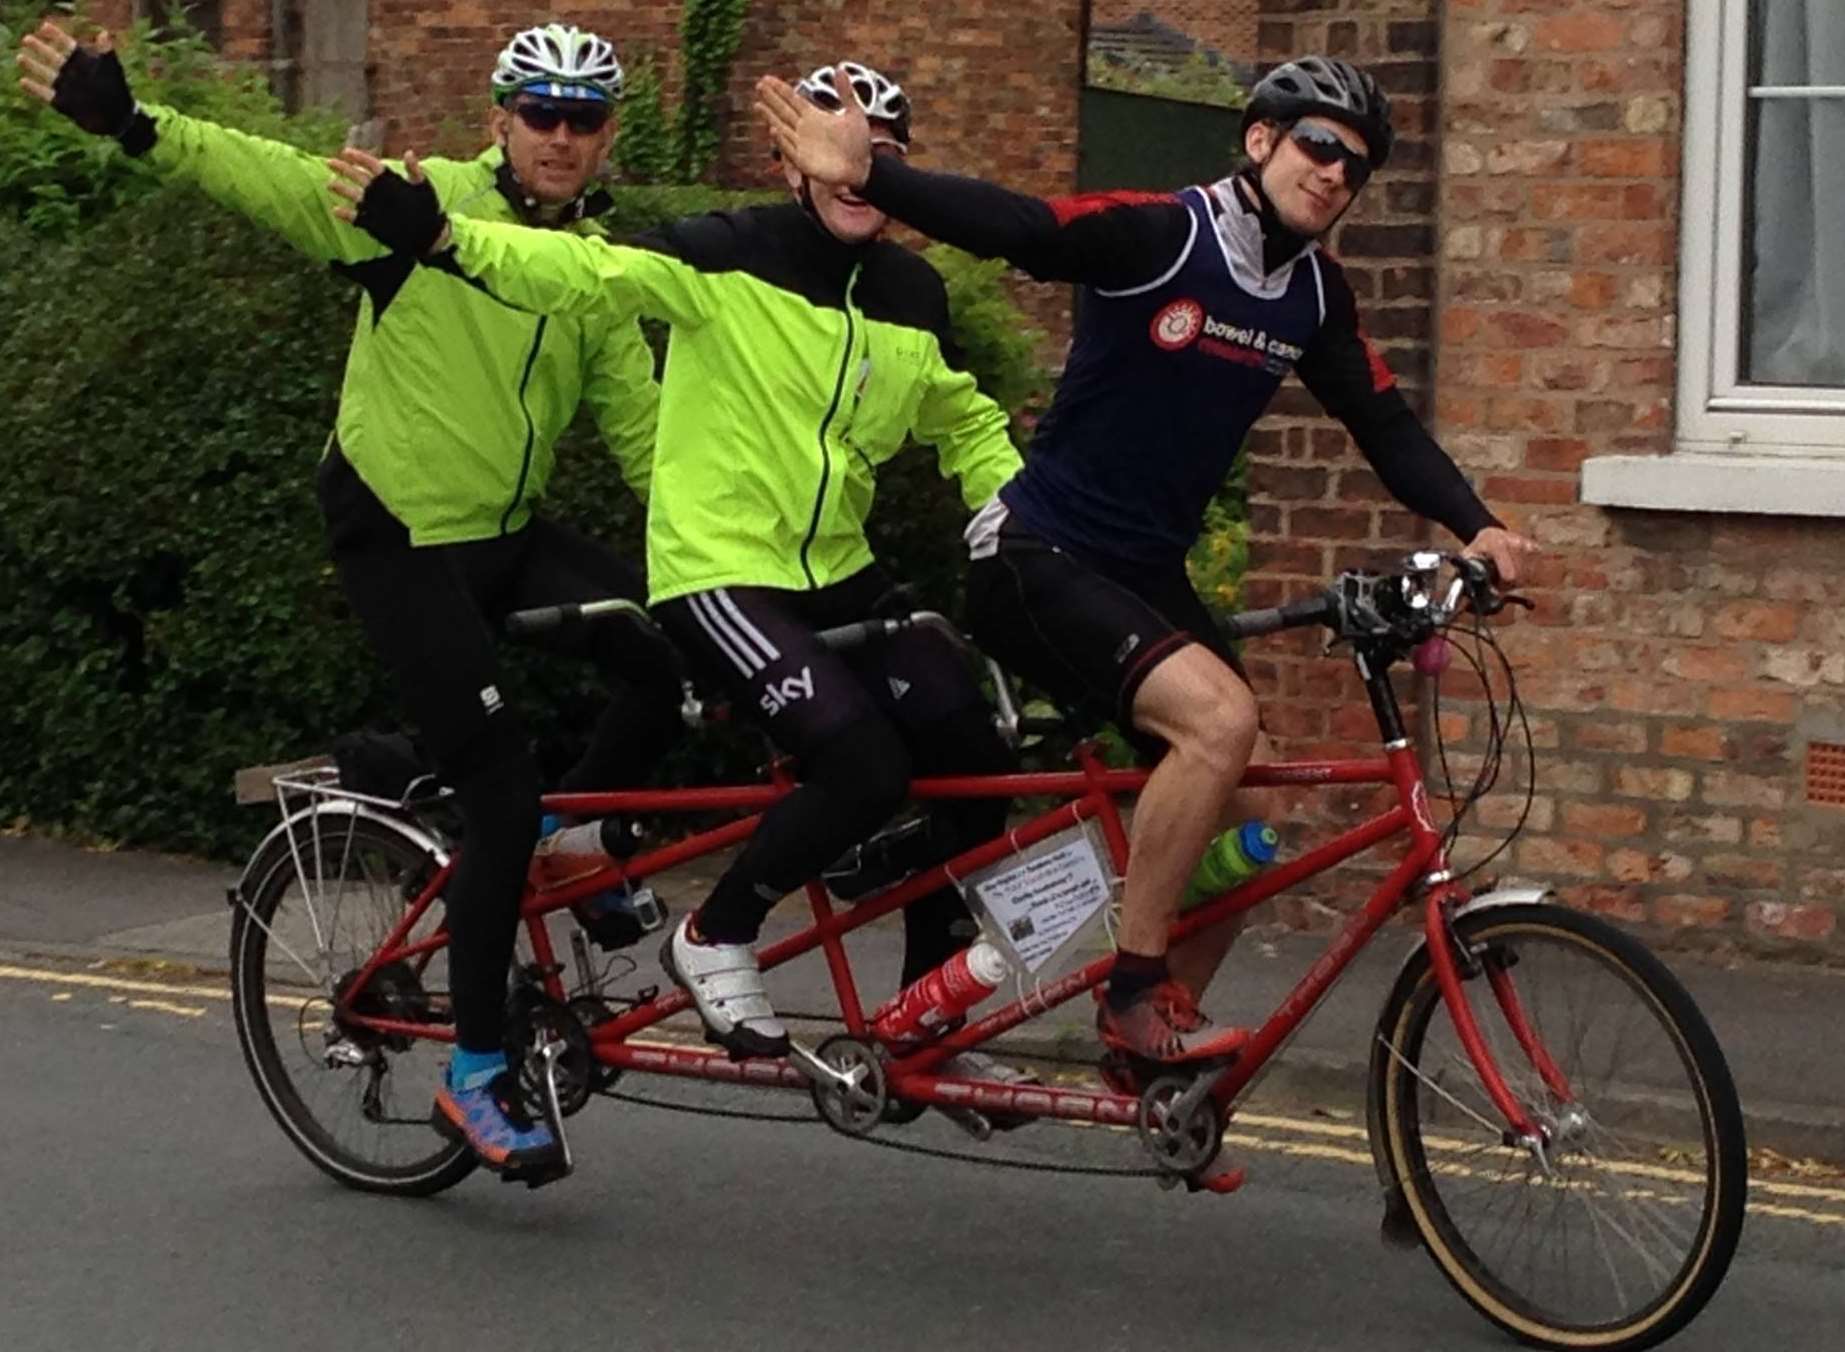 Three men are cycling 500 miles on a three-seater bicycle from Holme ... - N6OQ0RXSAJIGYUYYUUXA